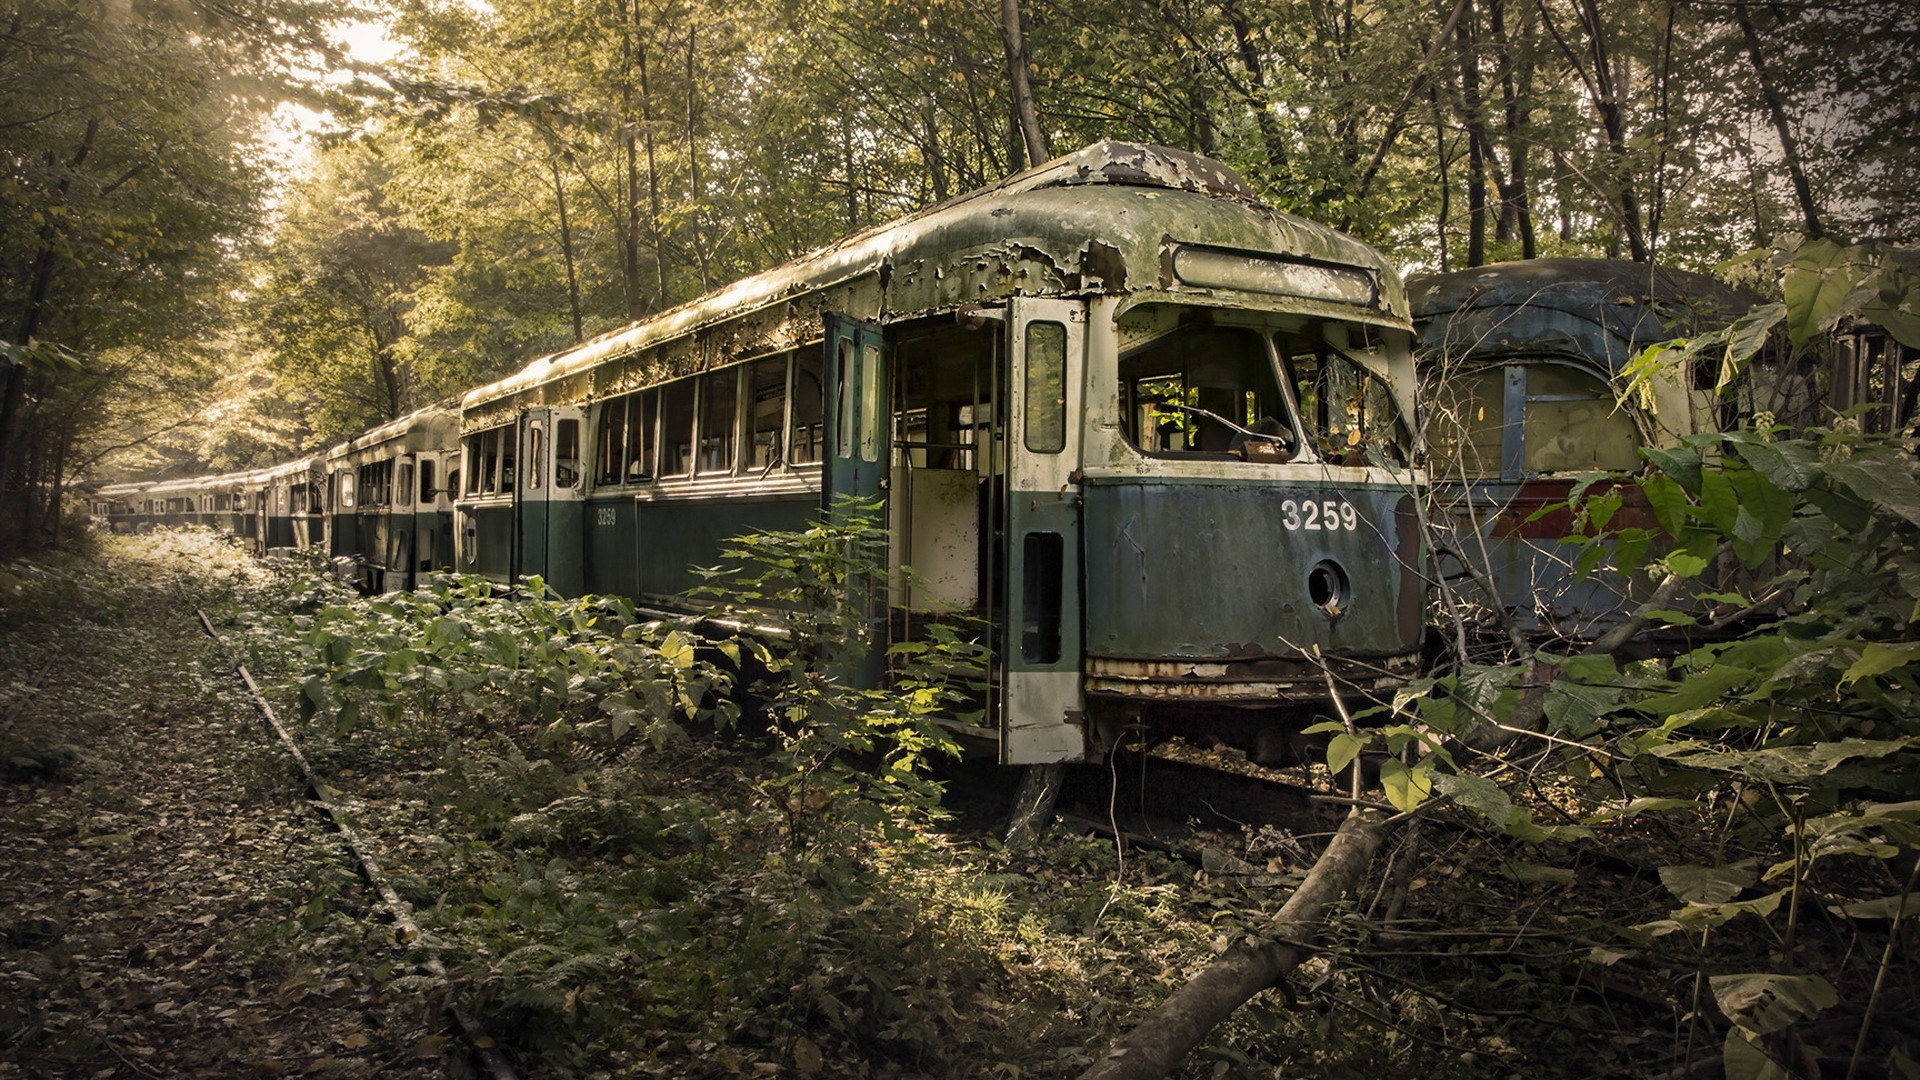 General 1920x1080 nature trees leaves vehicle tram railway rail yard forest branch wreck old abandoned broken rust ruins numbers plants